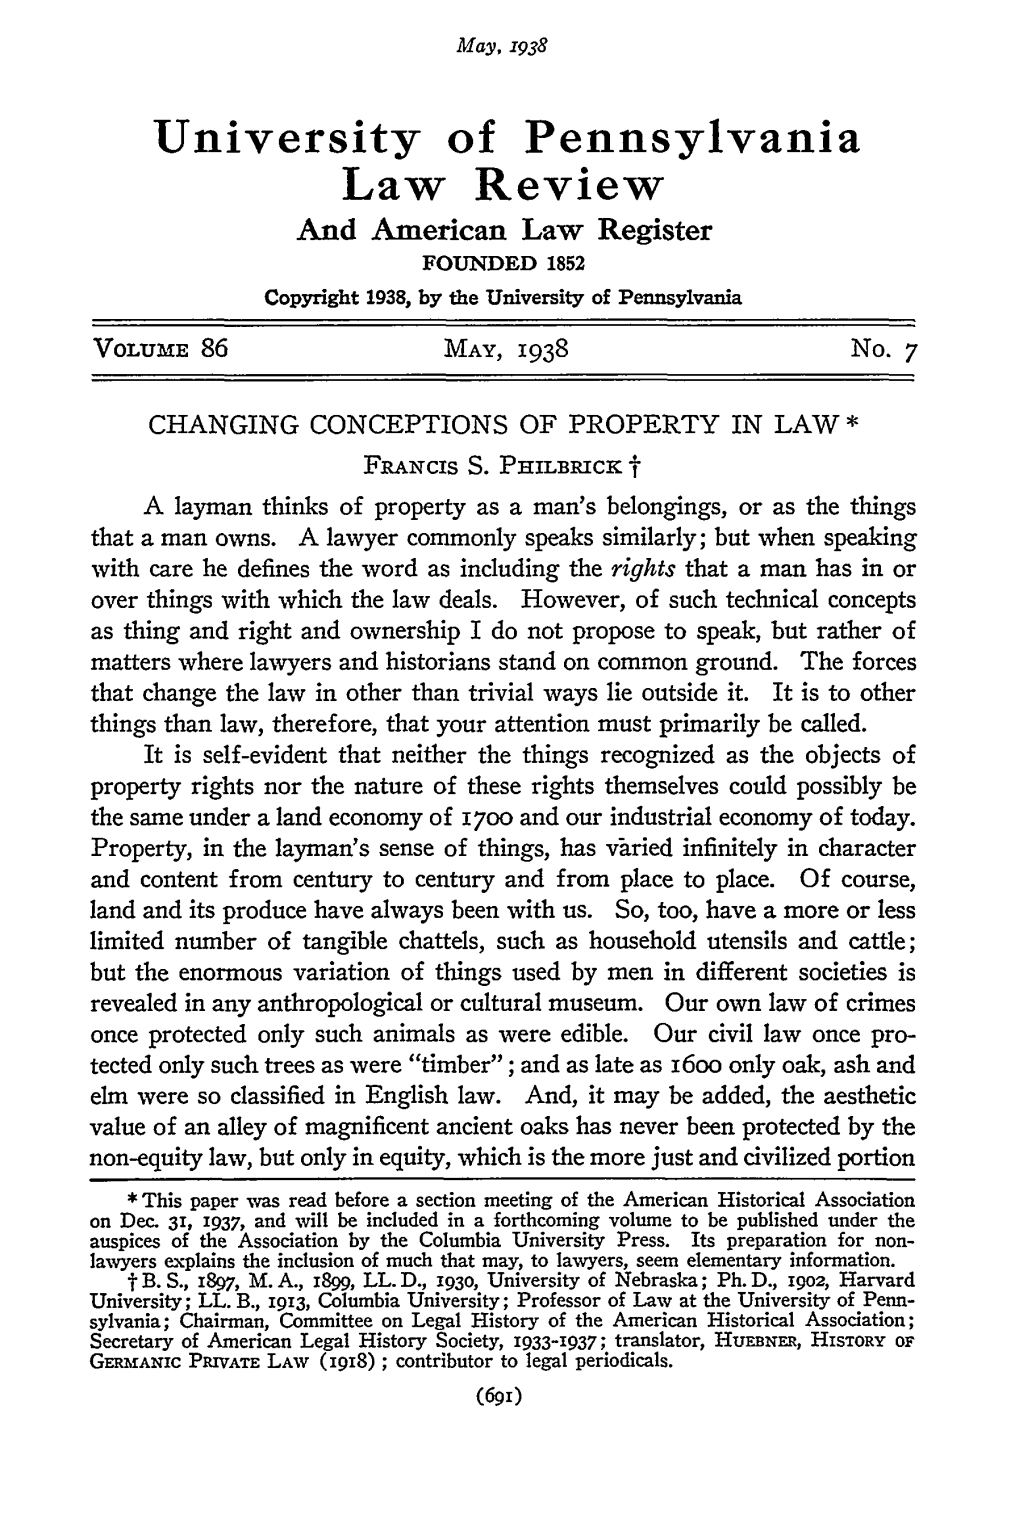 CHANGING CONCEPTIONS of PROPERTY in LAW * Francis S